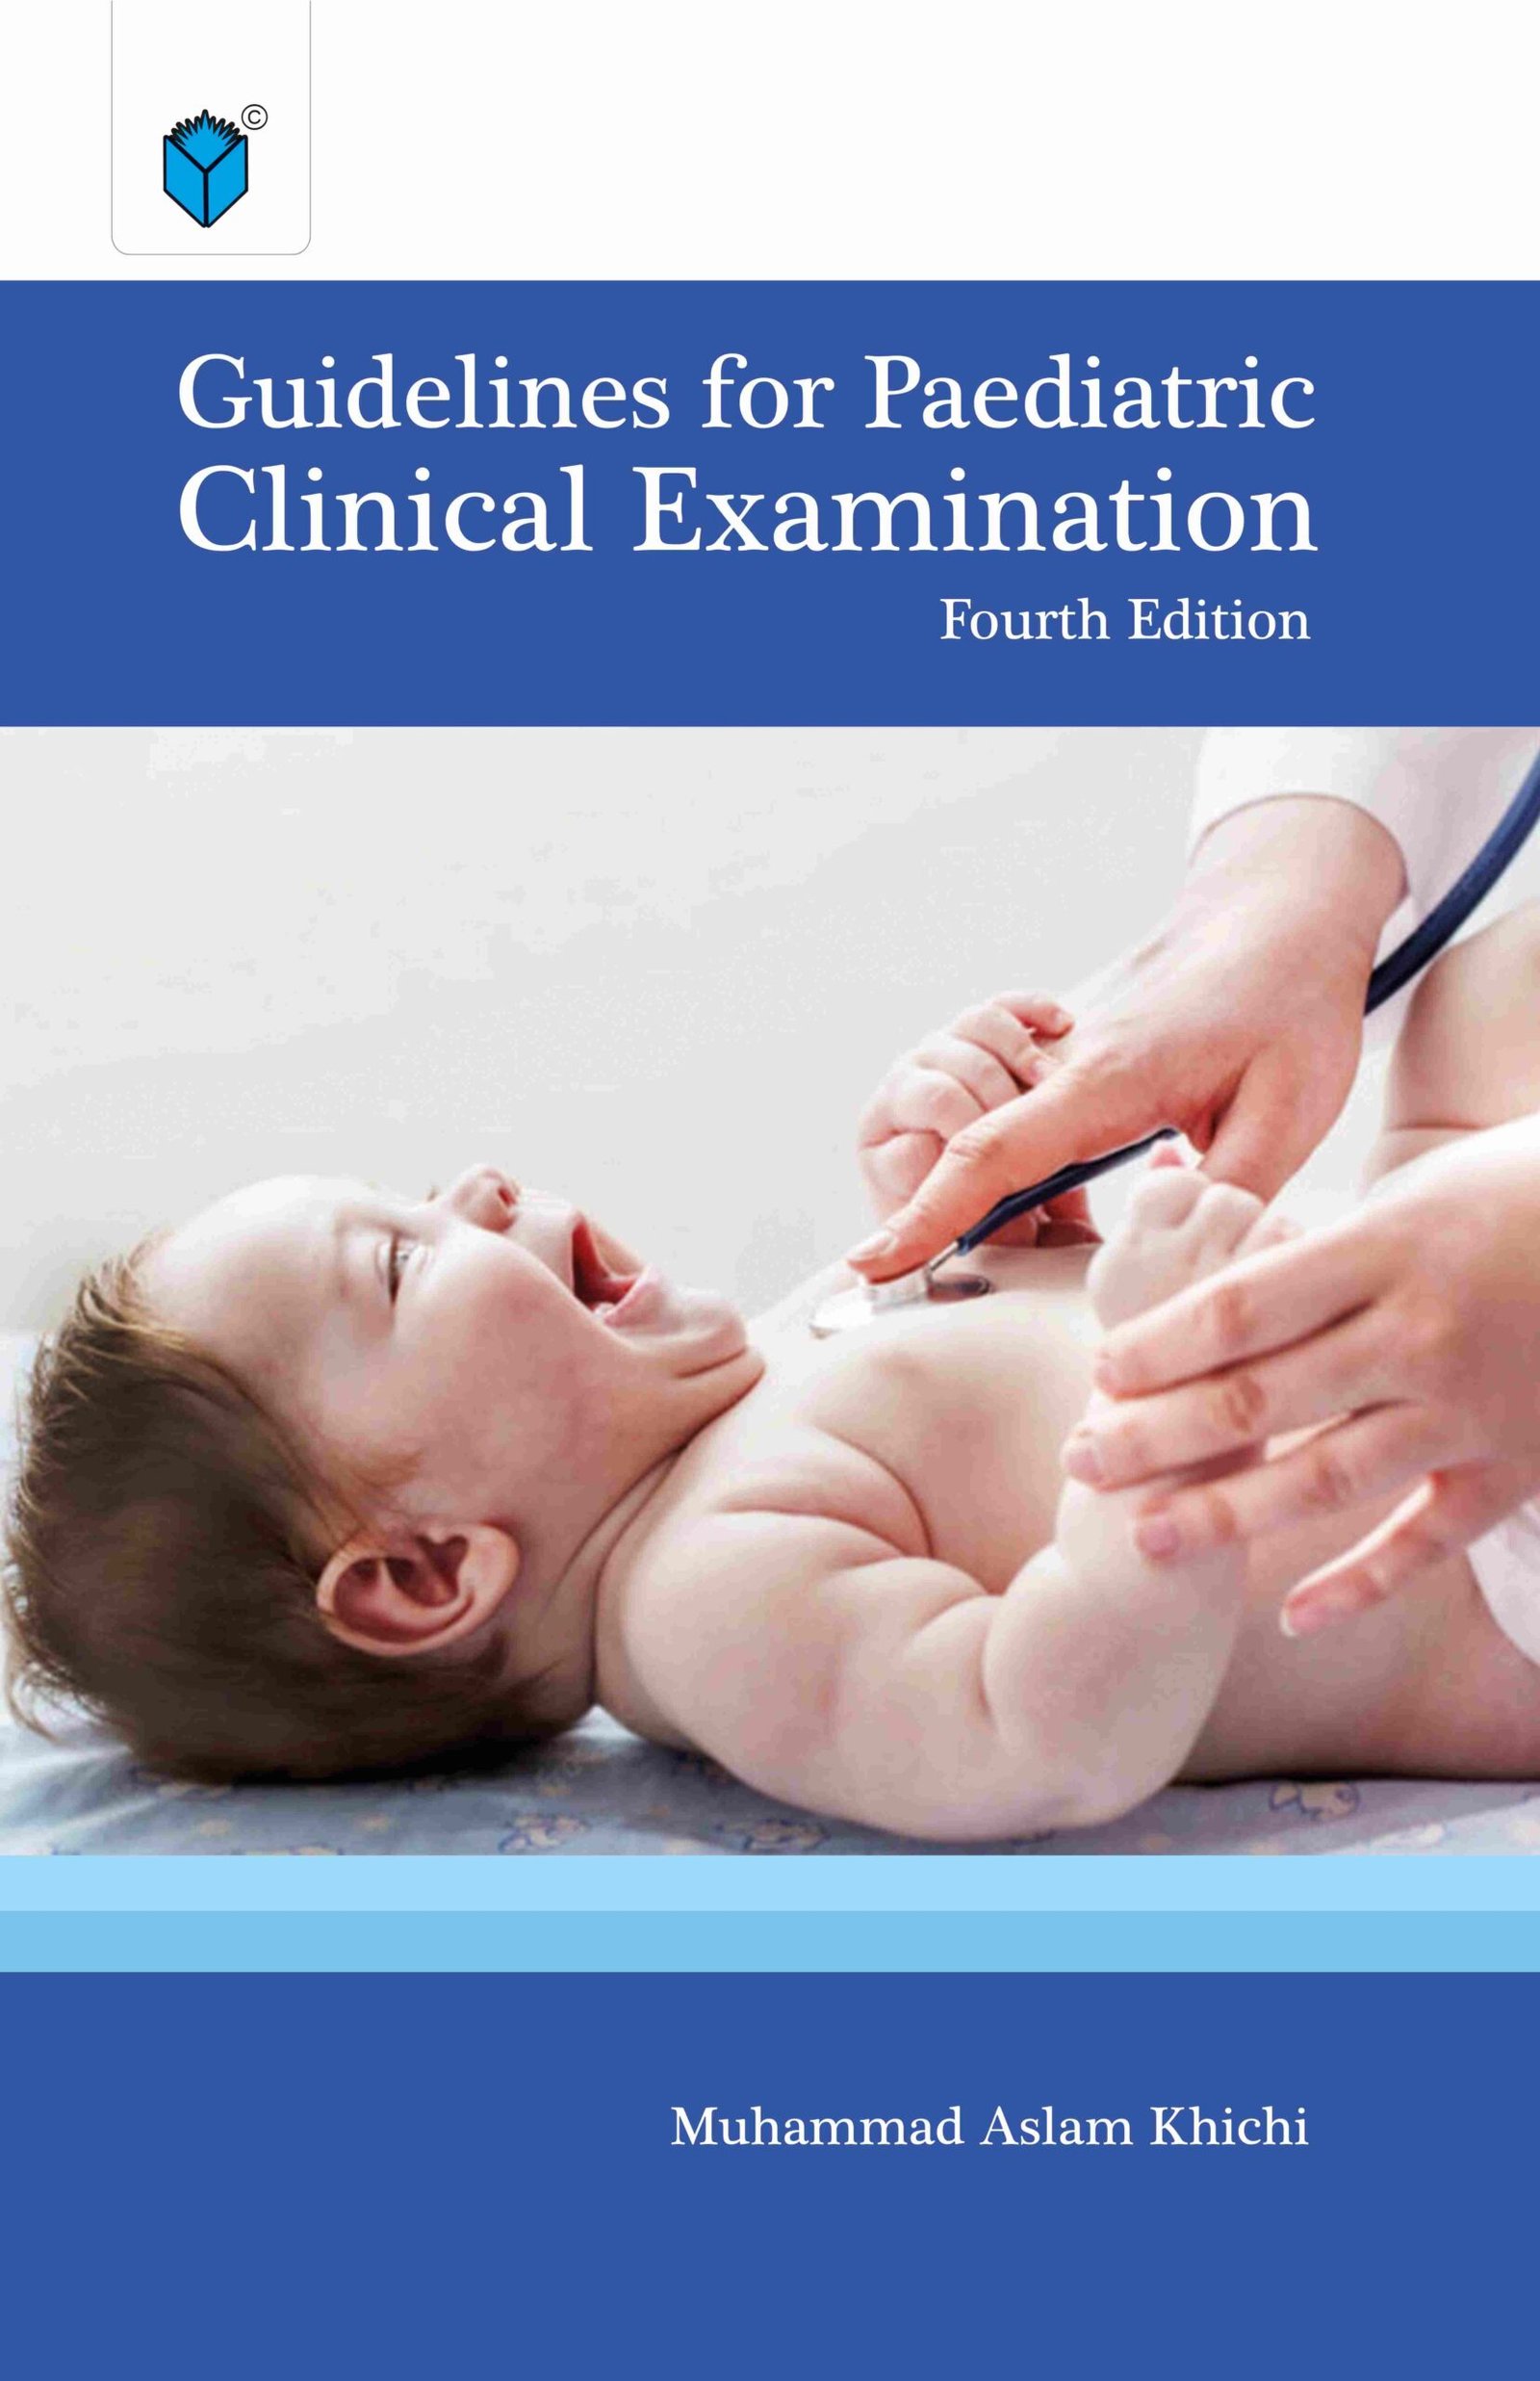 GUIDELINES FOR PAEDIATRIC CLINICAL EXAMINATIONS